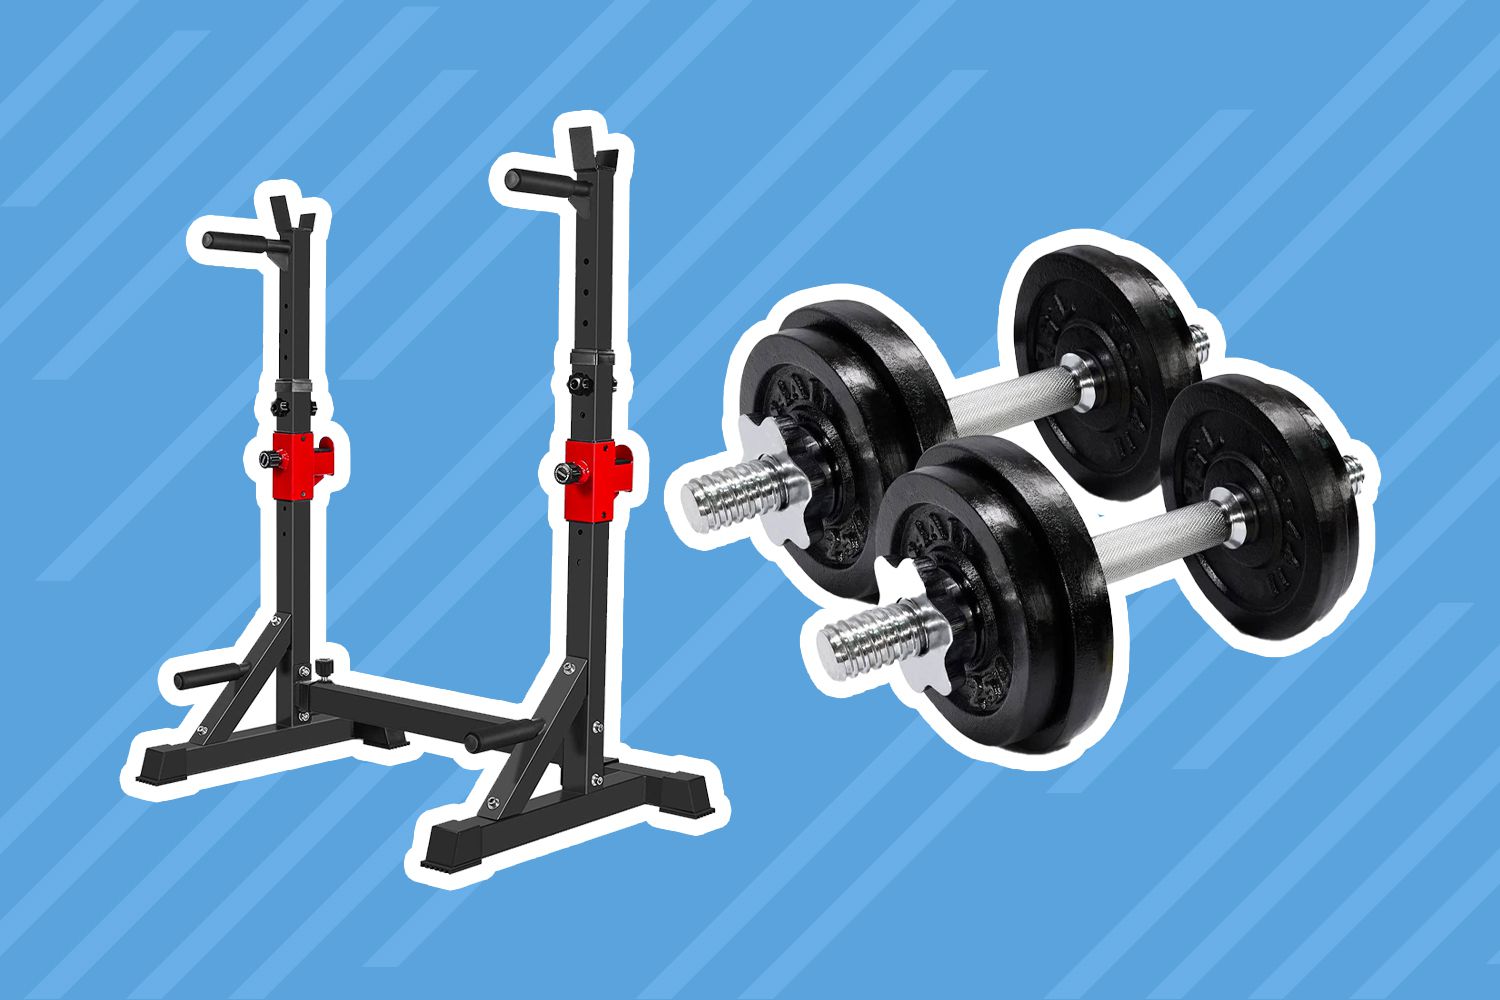 20-best-budget-home-gym-equipment-buys-of-2022-tout